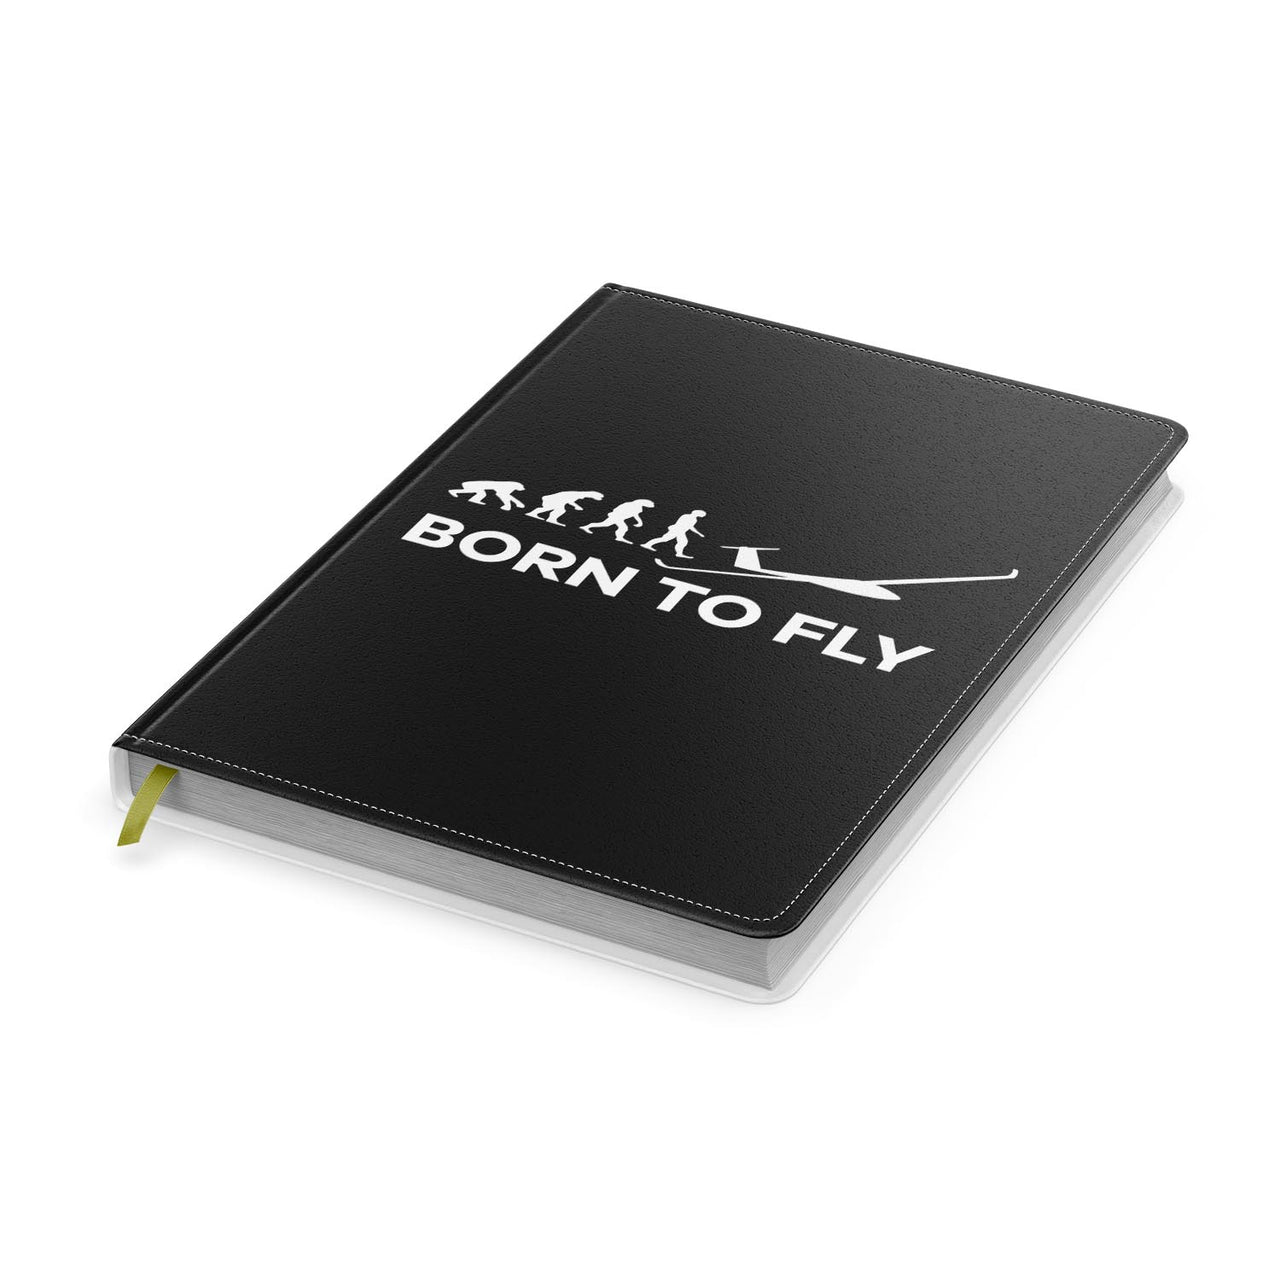 Born To Fly Glider Designed Notebooks